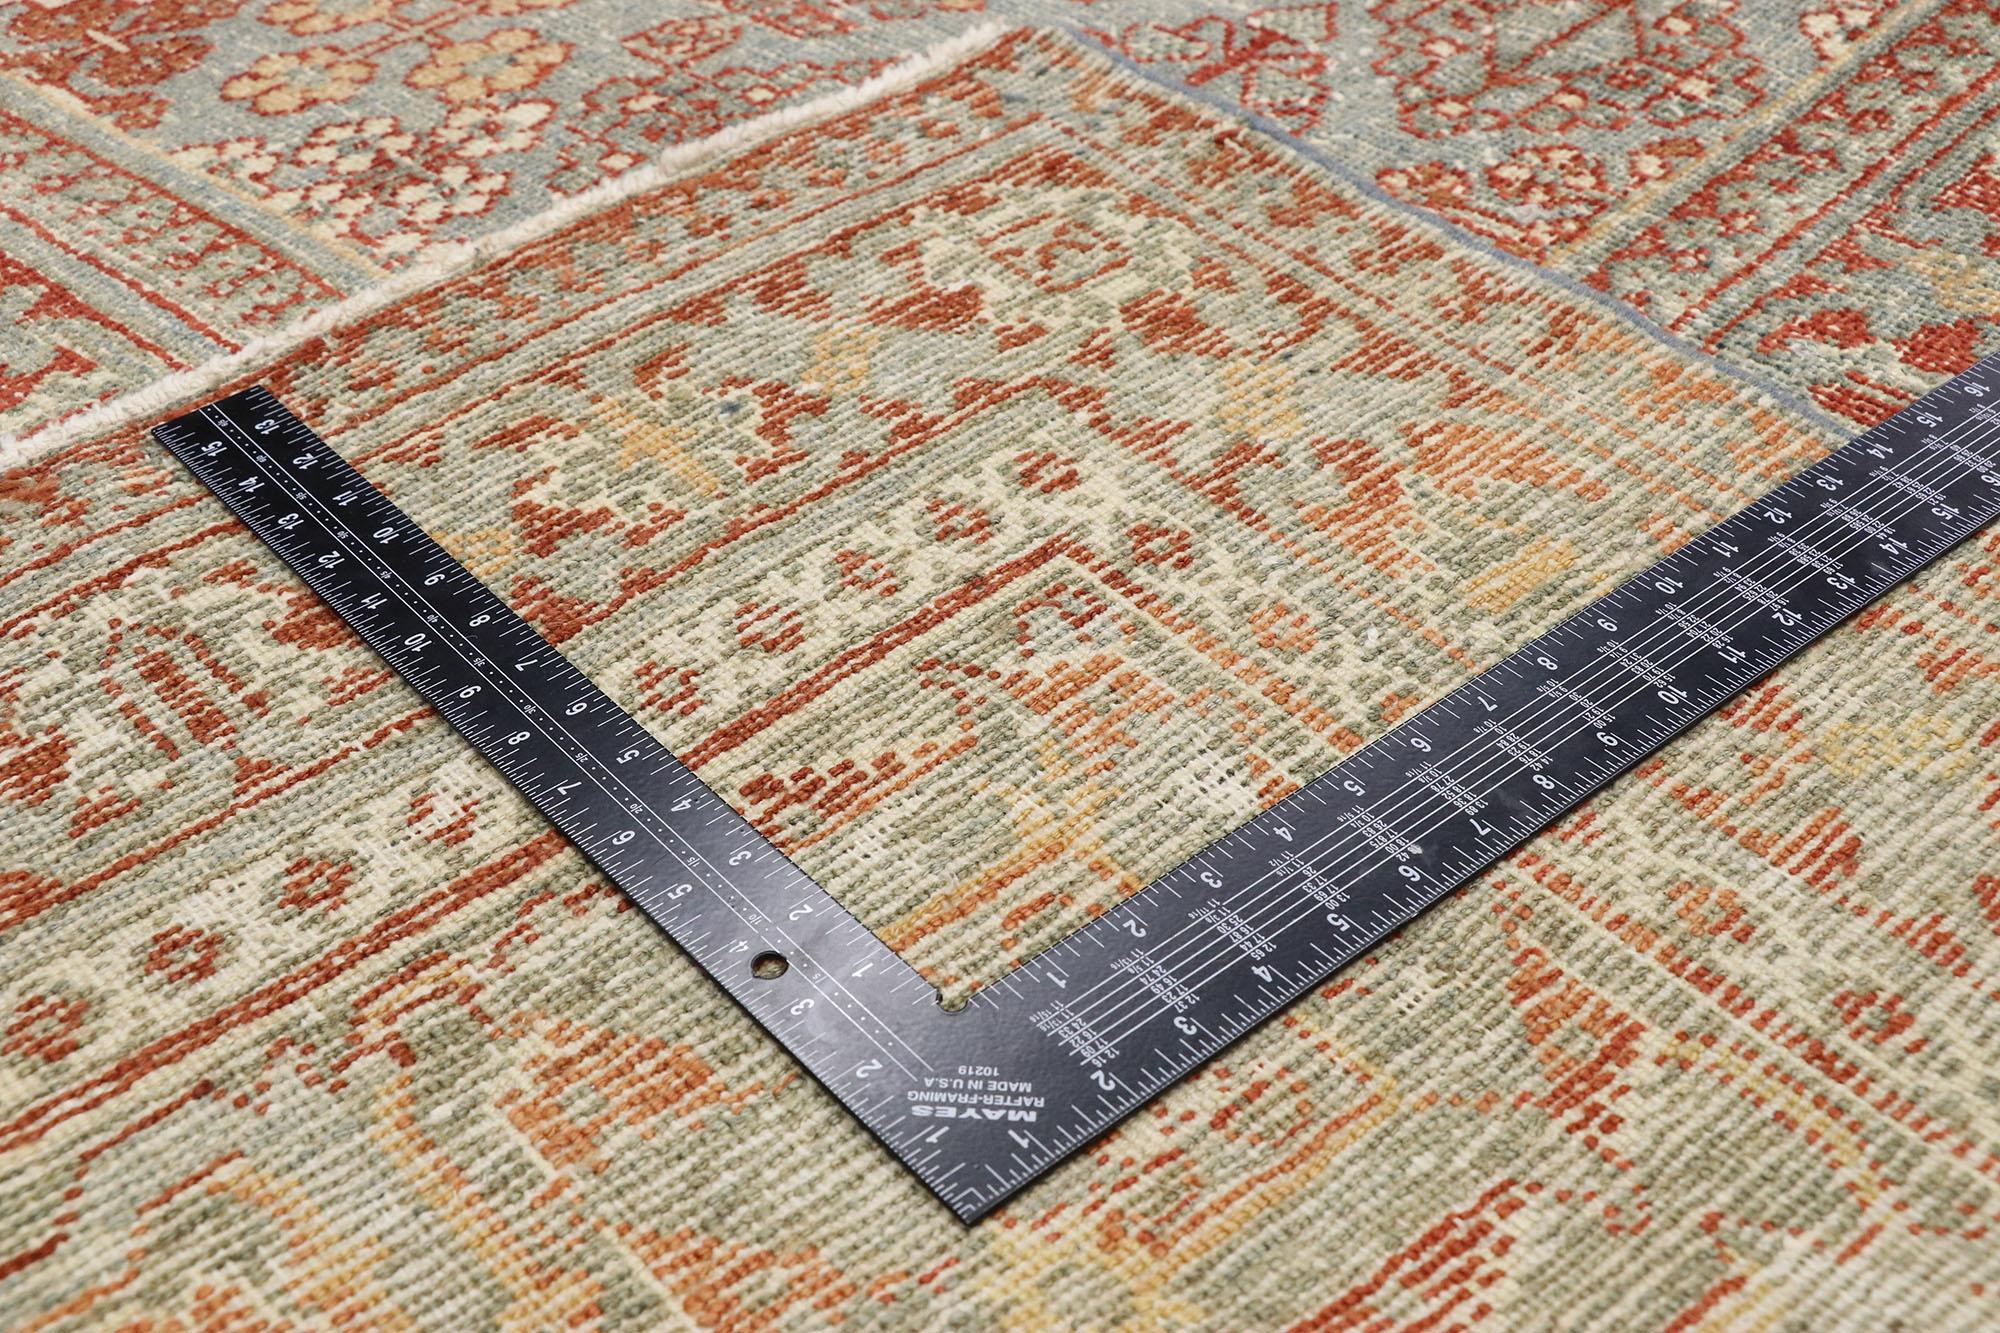 Hand-Knotted Distressed Antique Persian Joshegan Design Rug with Relaxed Rustic Federal Style